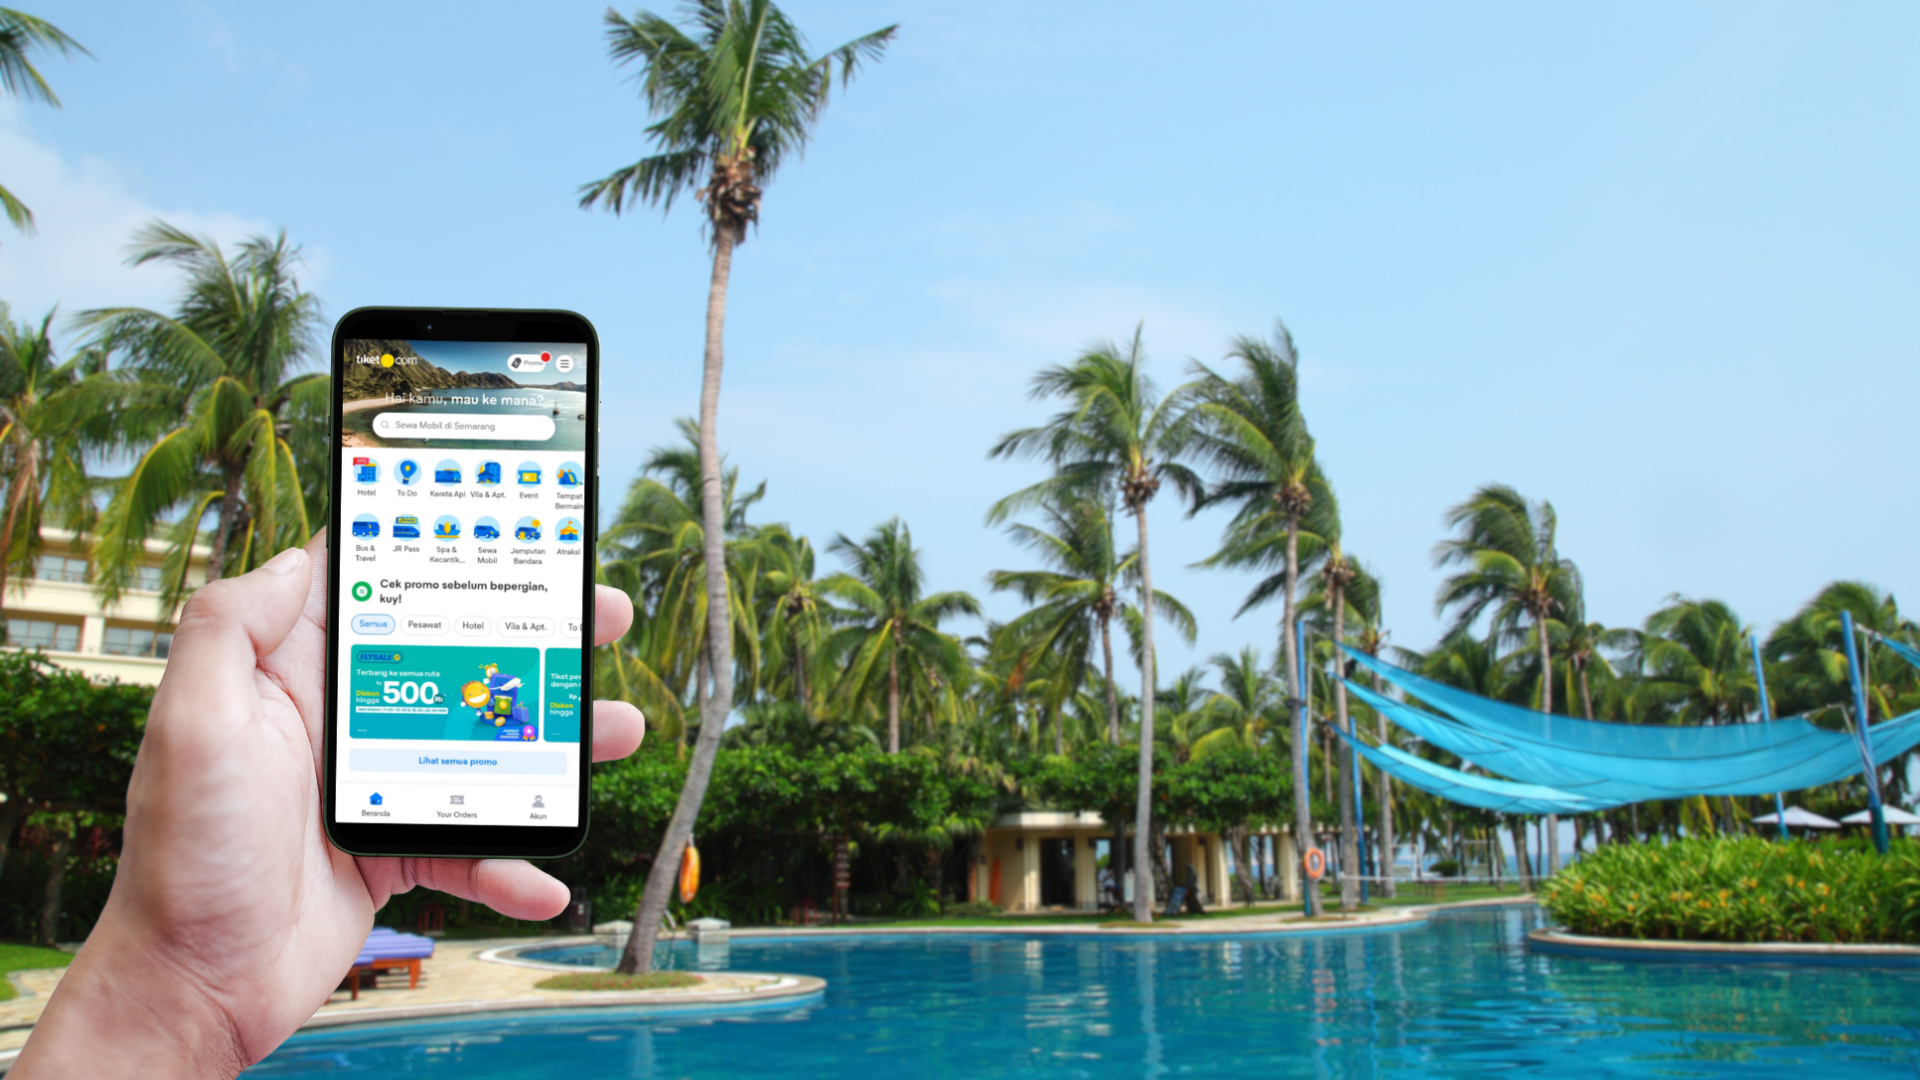 Male traveler holding a smartphone displaying Tiket.com application on the hotel pool